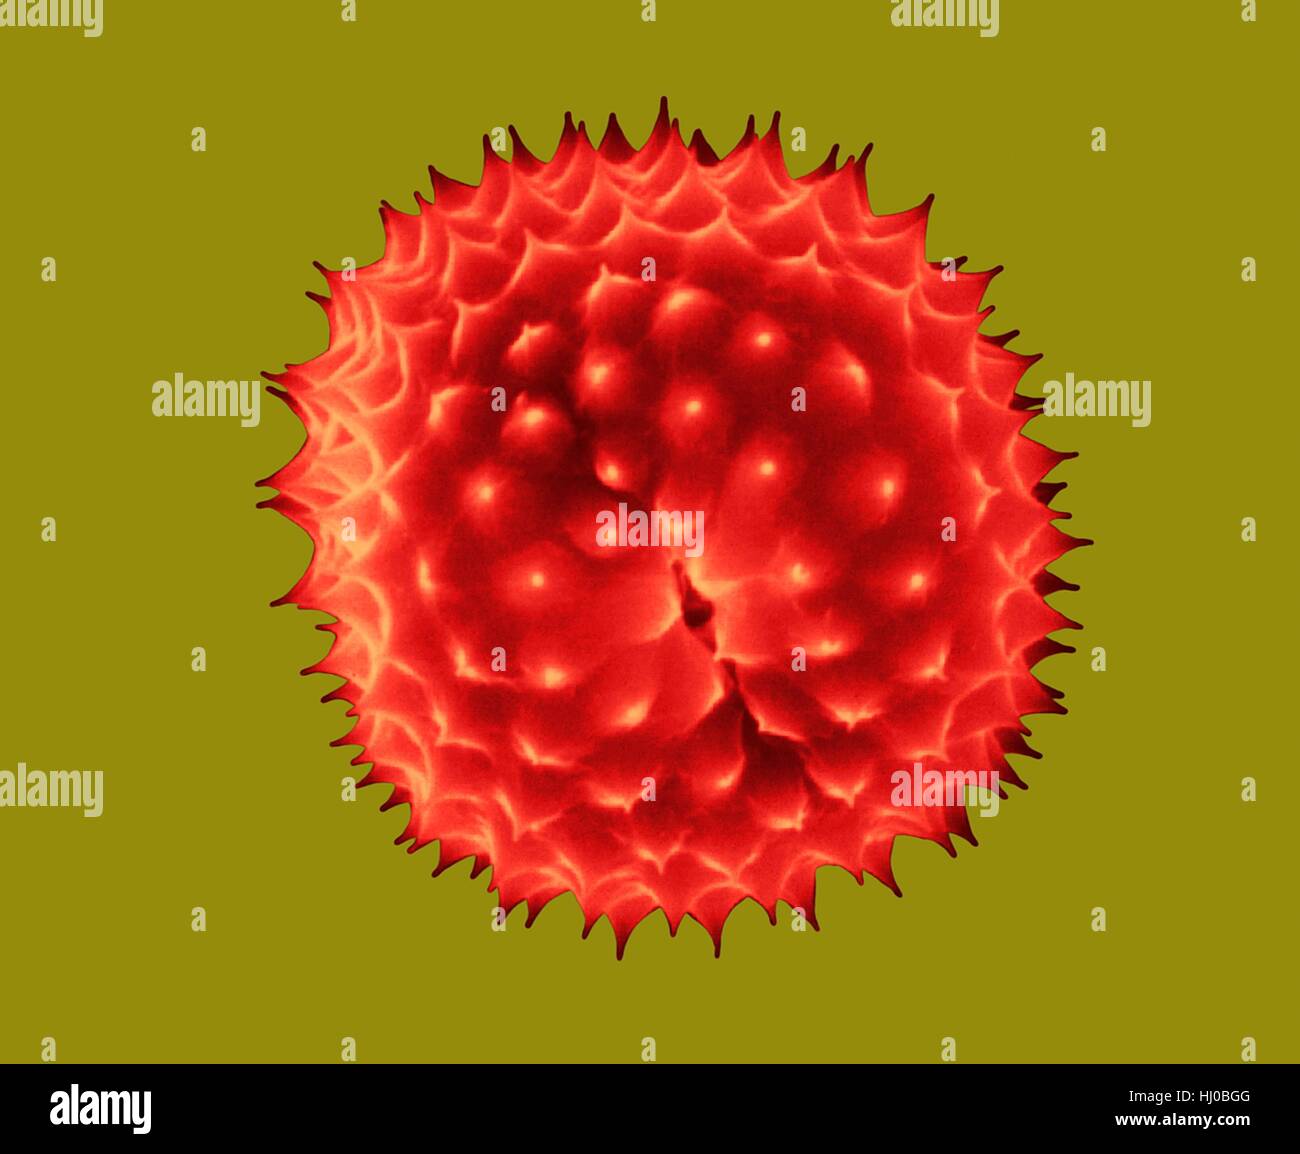 Ragweed pollen,Ambrosia psilostachya,coloured scanning electron micrograph (SEM).This pollen is allergen.Ragweed is main cause of weed allergies.Ragweed pollen is notorious for causing allergic reactions in humans,specifically allergic rhinitis.Up to half of all cases of pollen-related allergic Stock Photo